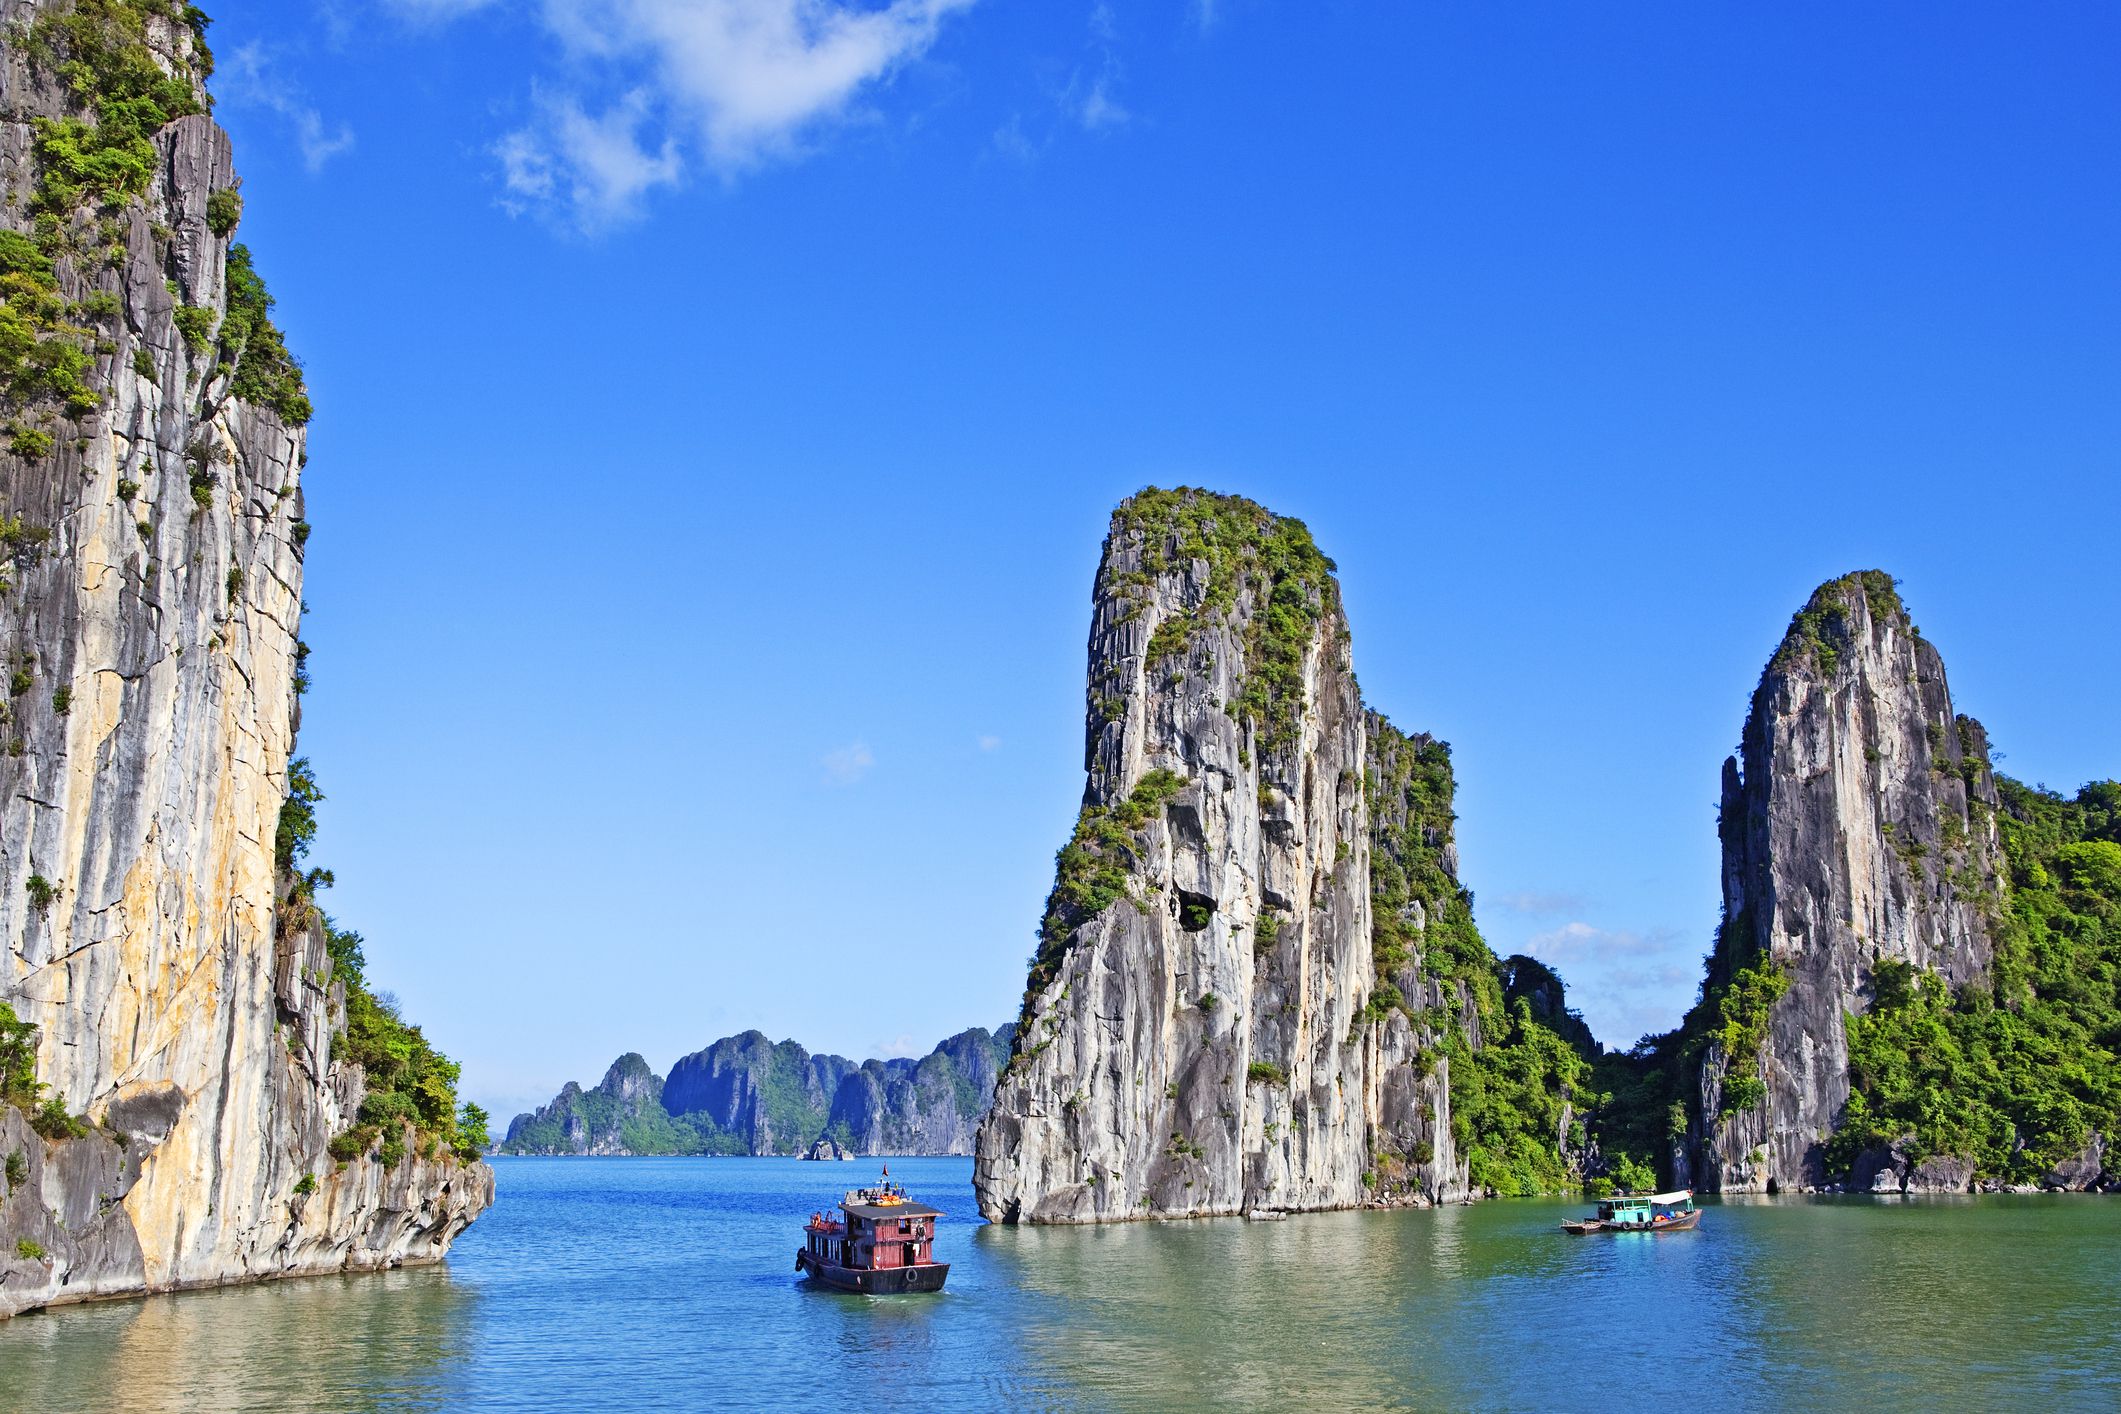 Explore one of the most fascinating destinations in Southeast Asia with this must-do tour